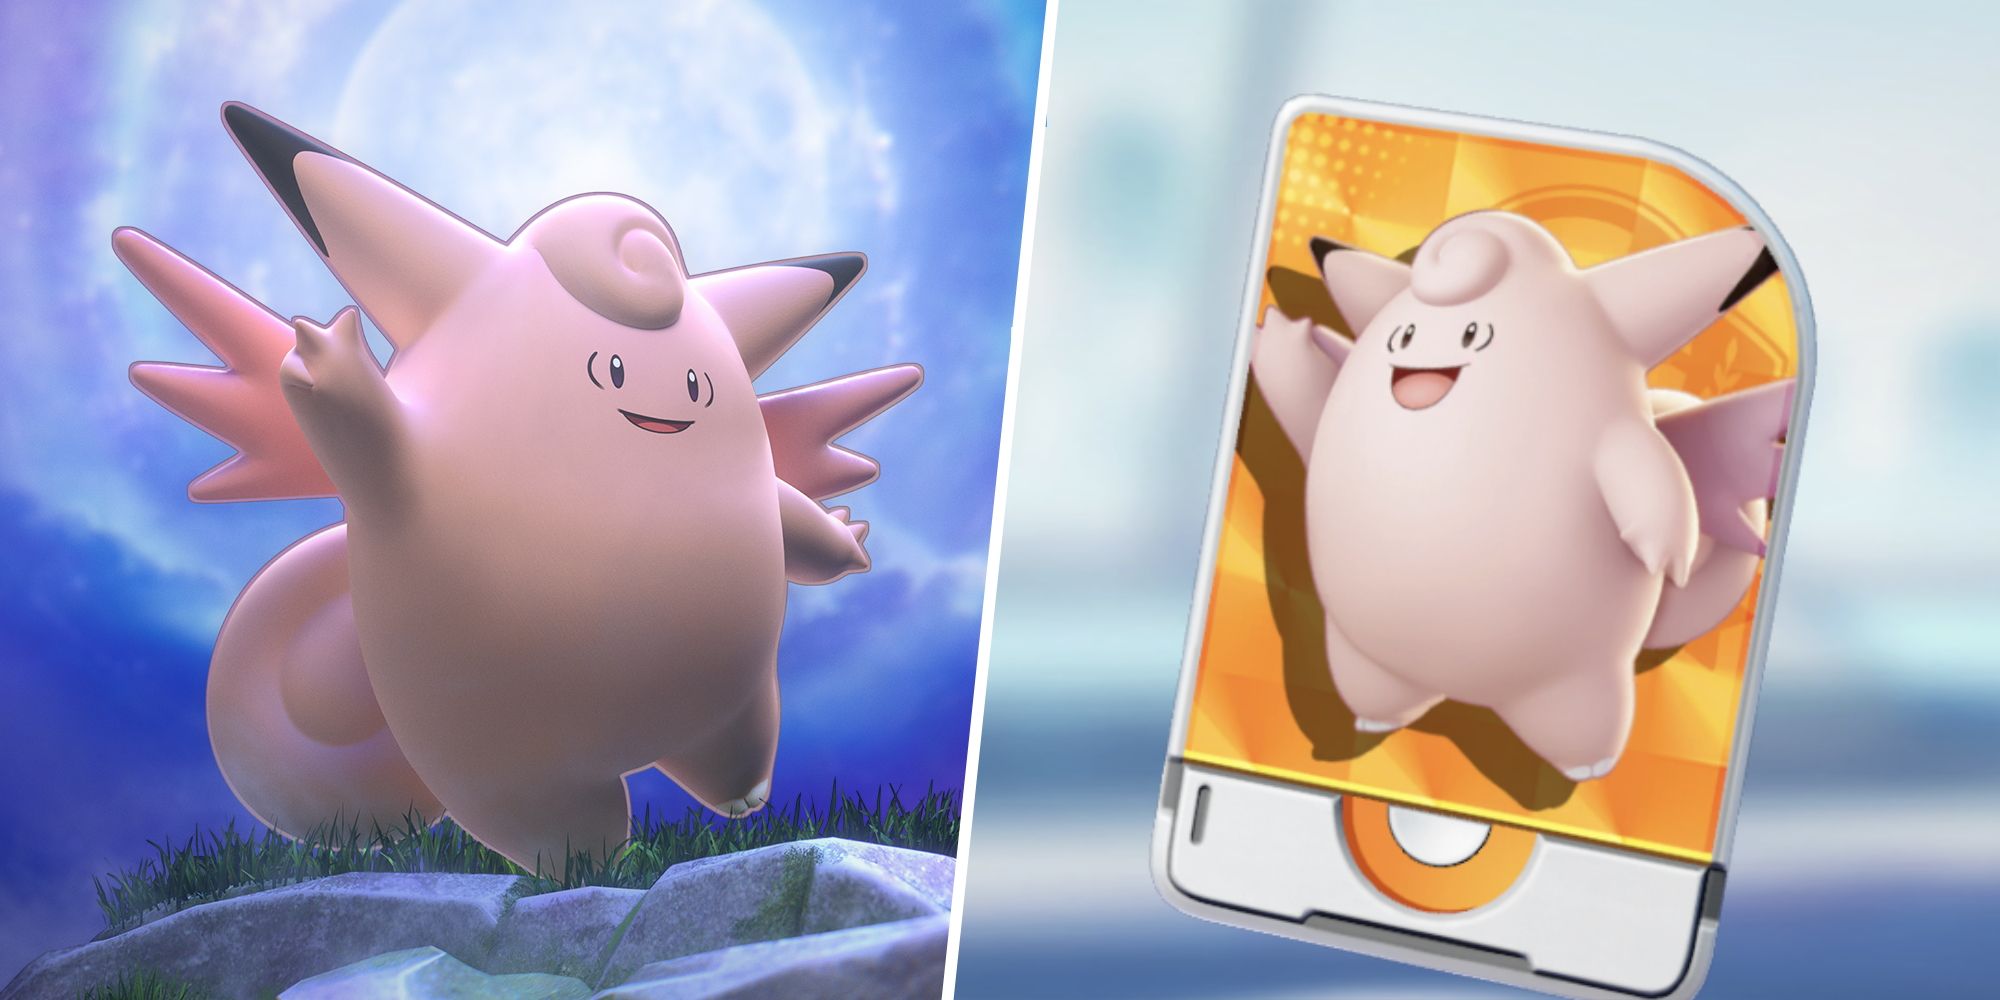 Image of Clefable in the moonlight split with the Clefable Unite License from Pokemon Unite